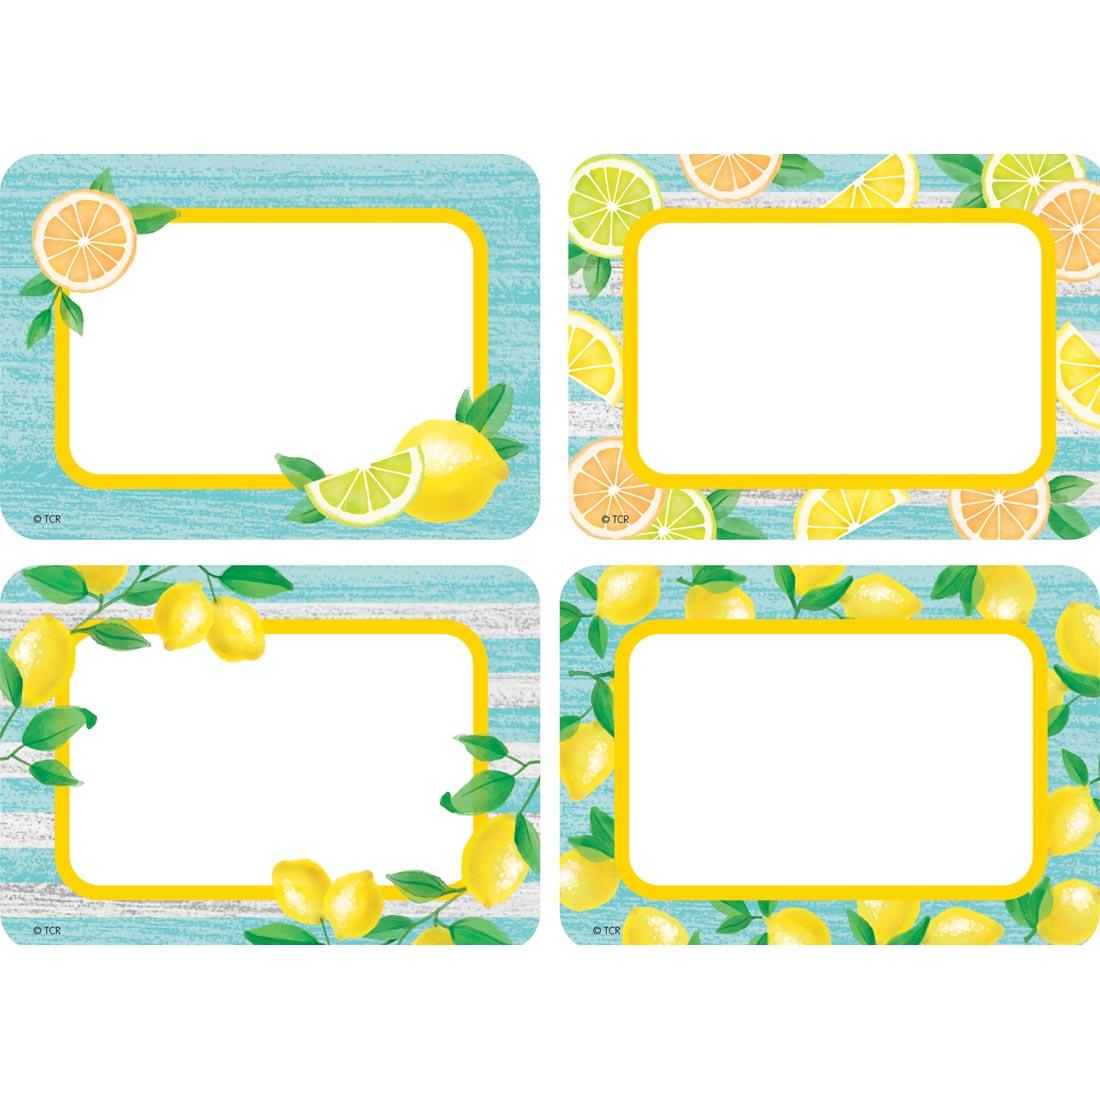 Four Name Tags / Labels from the Lemon Zest collection by Teacher Created Resources